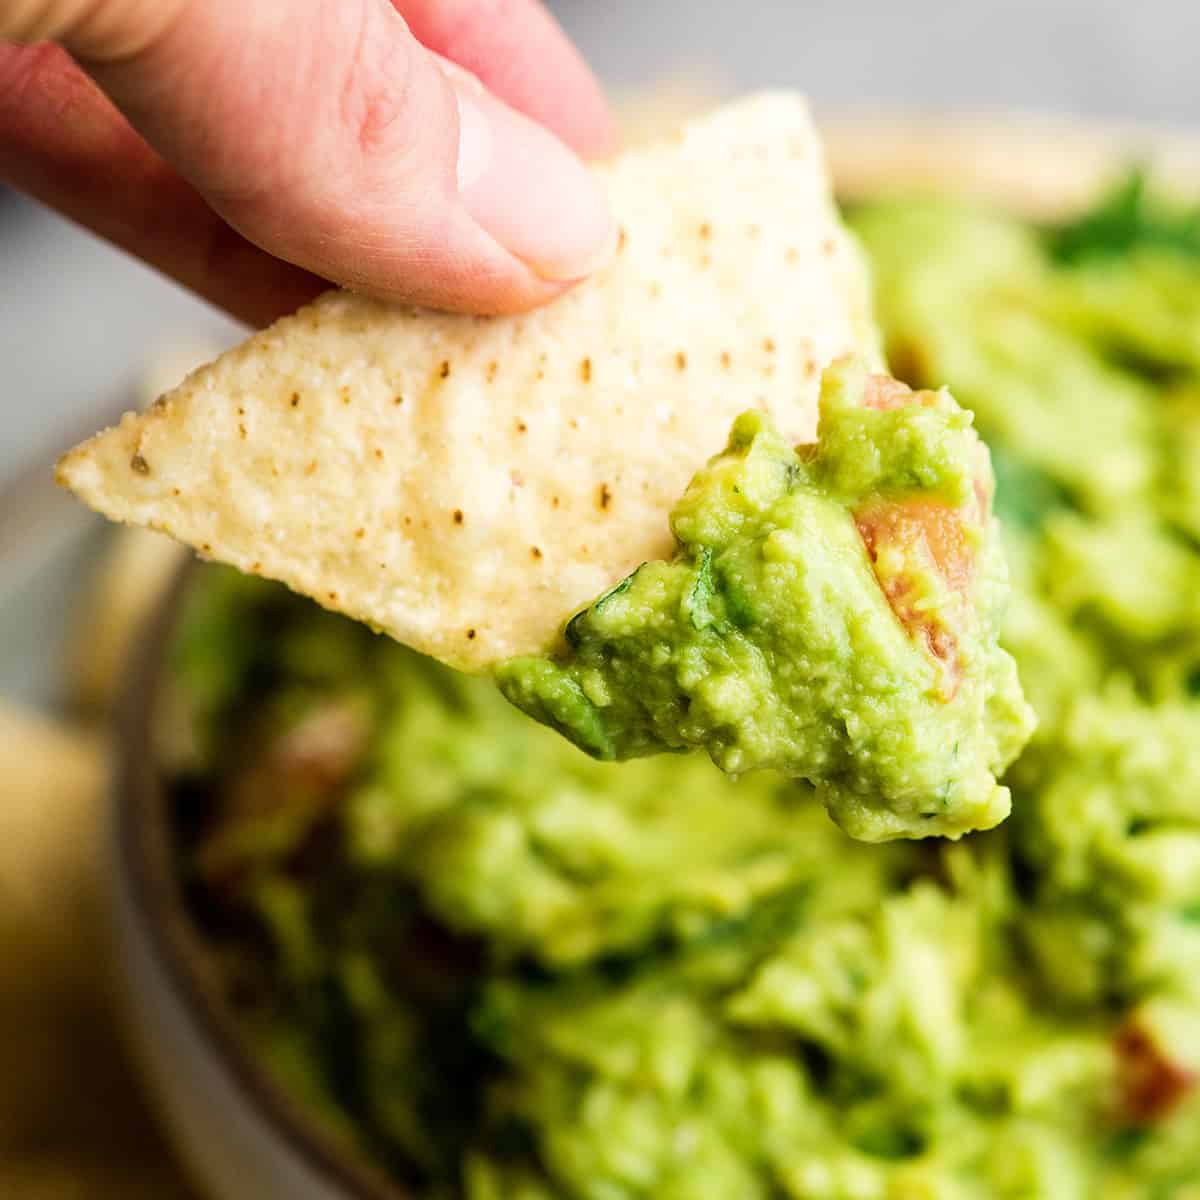 up close front view of a hand holding a chip with guacamole on it